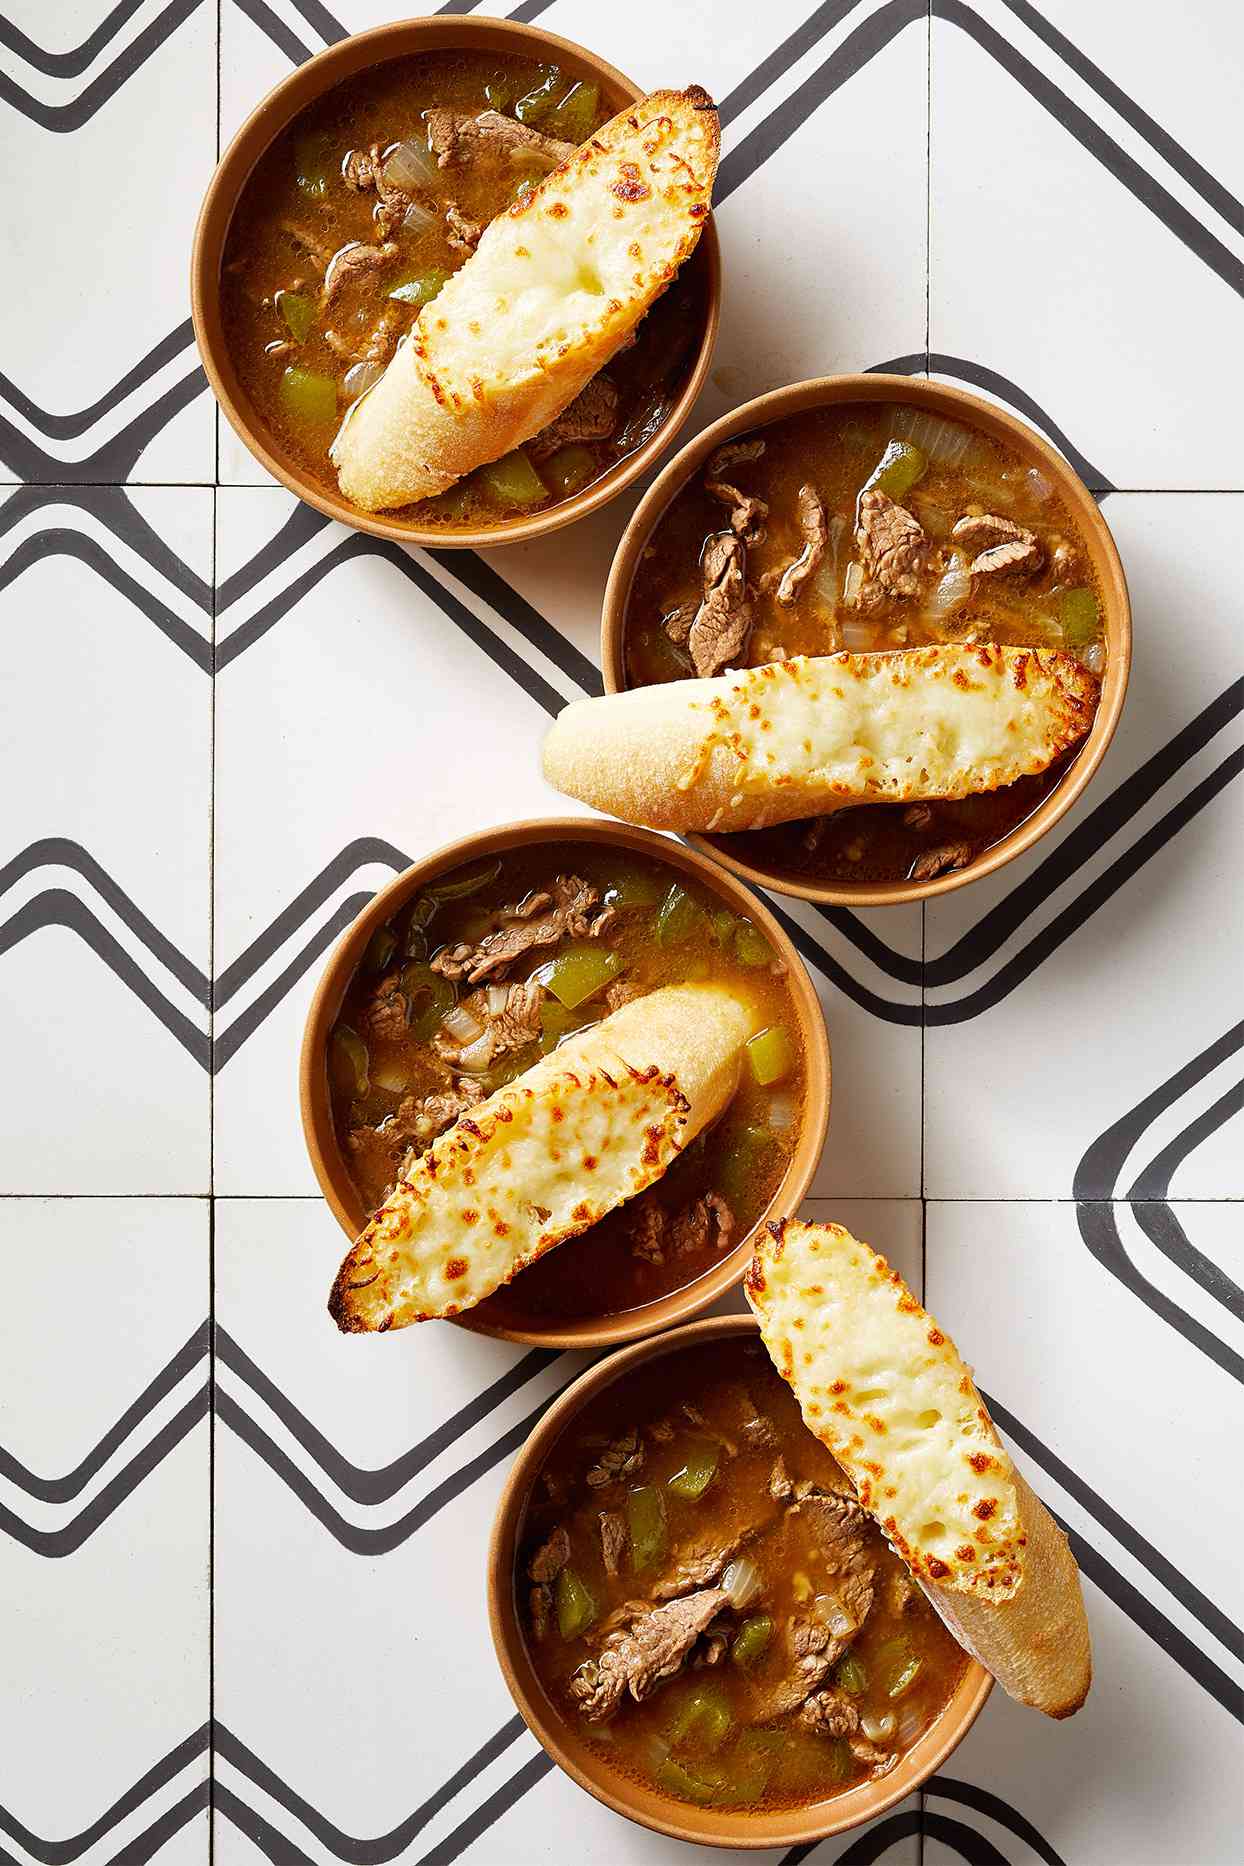 Cheese steak soup bowls with bread